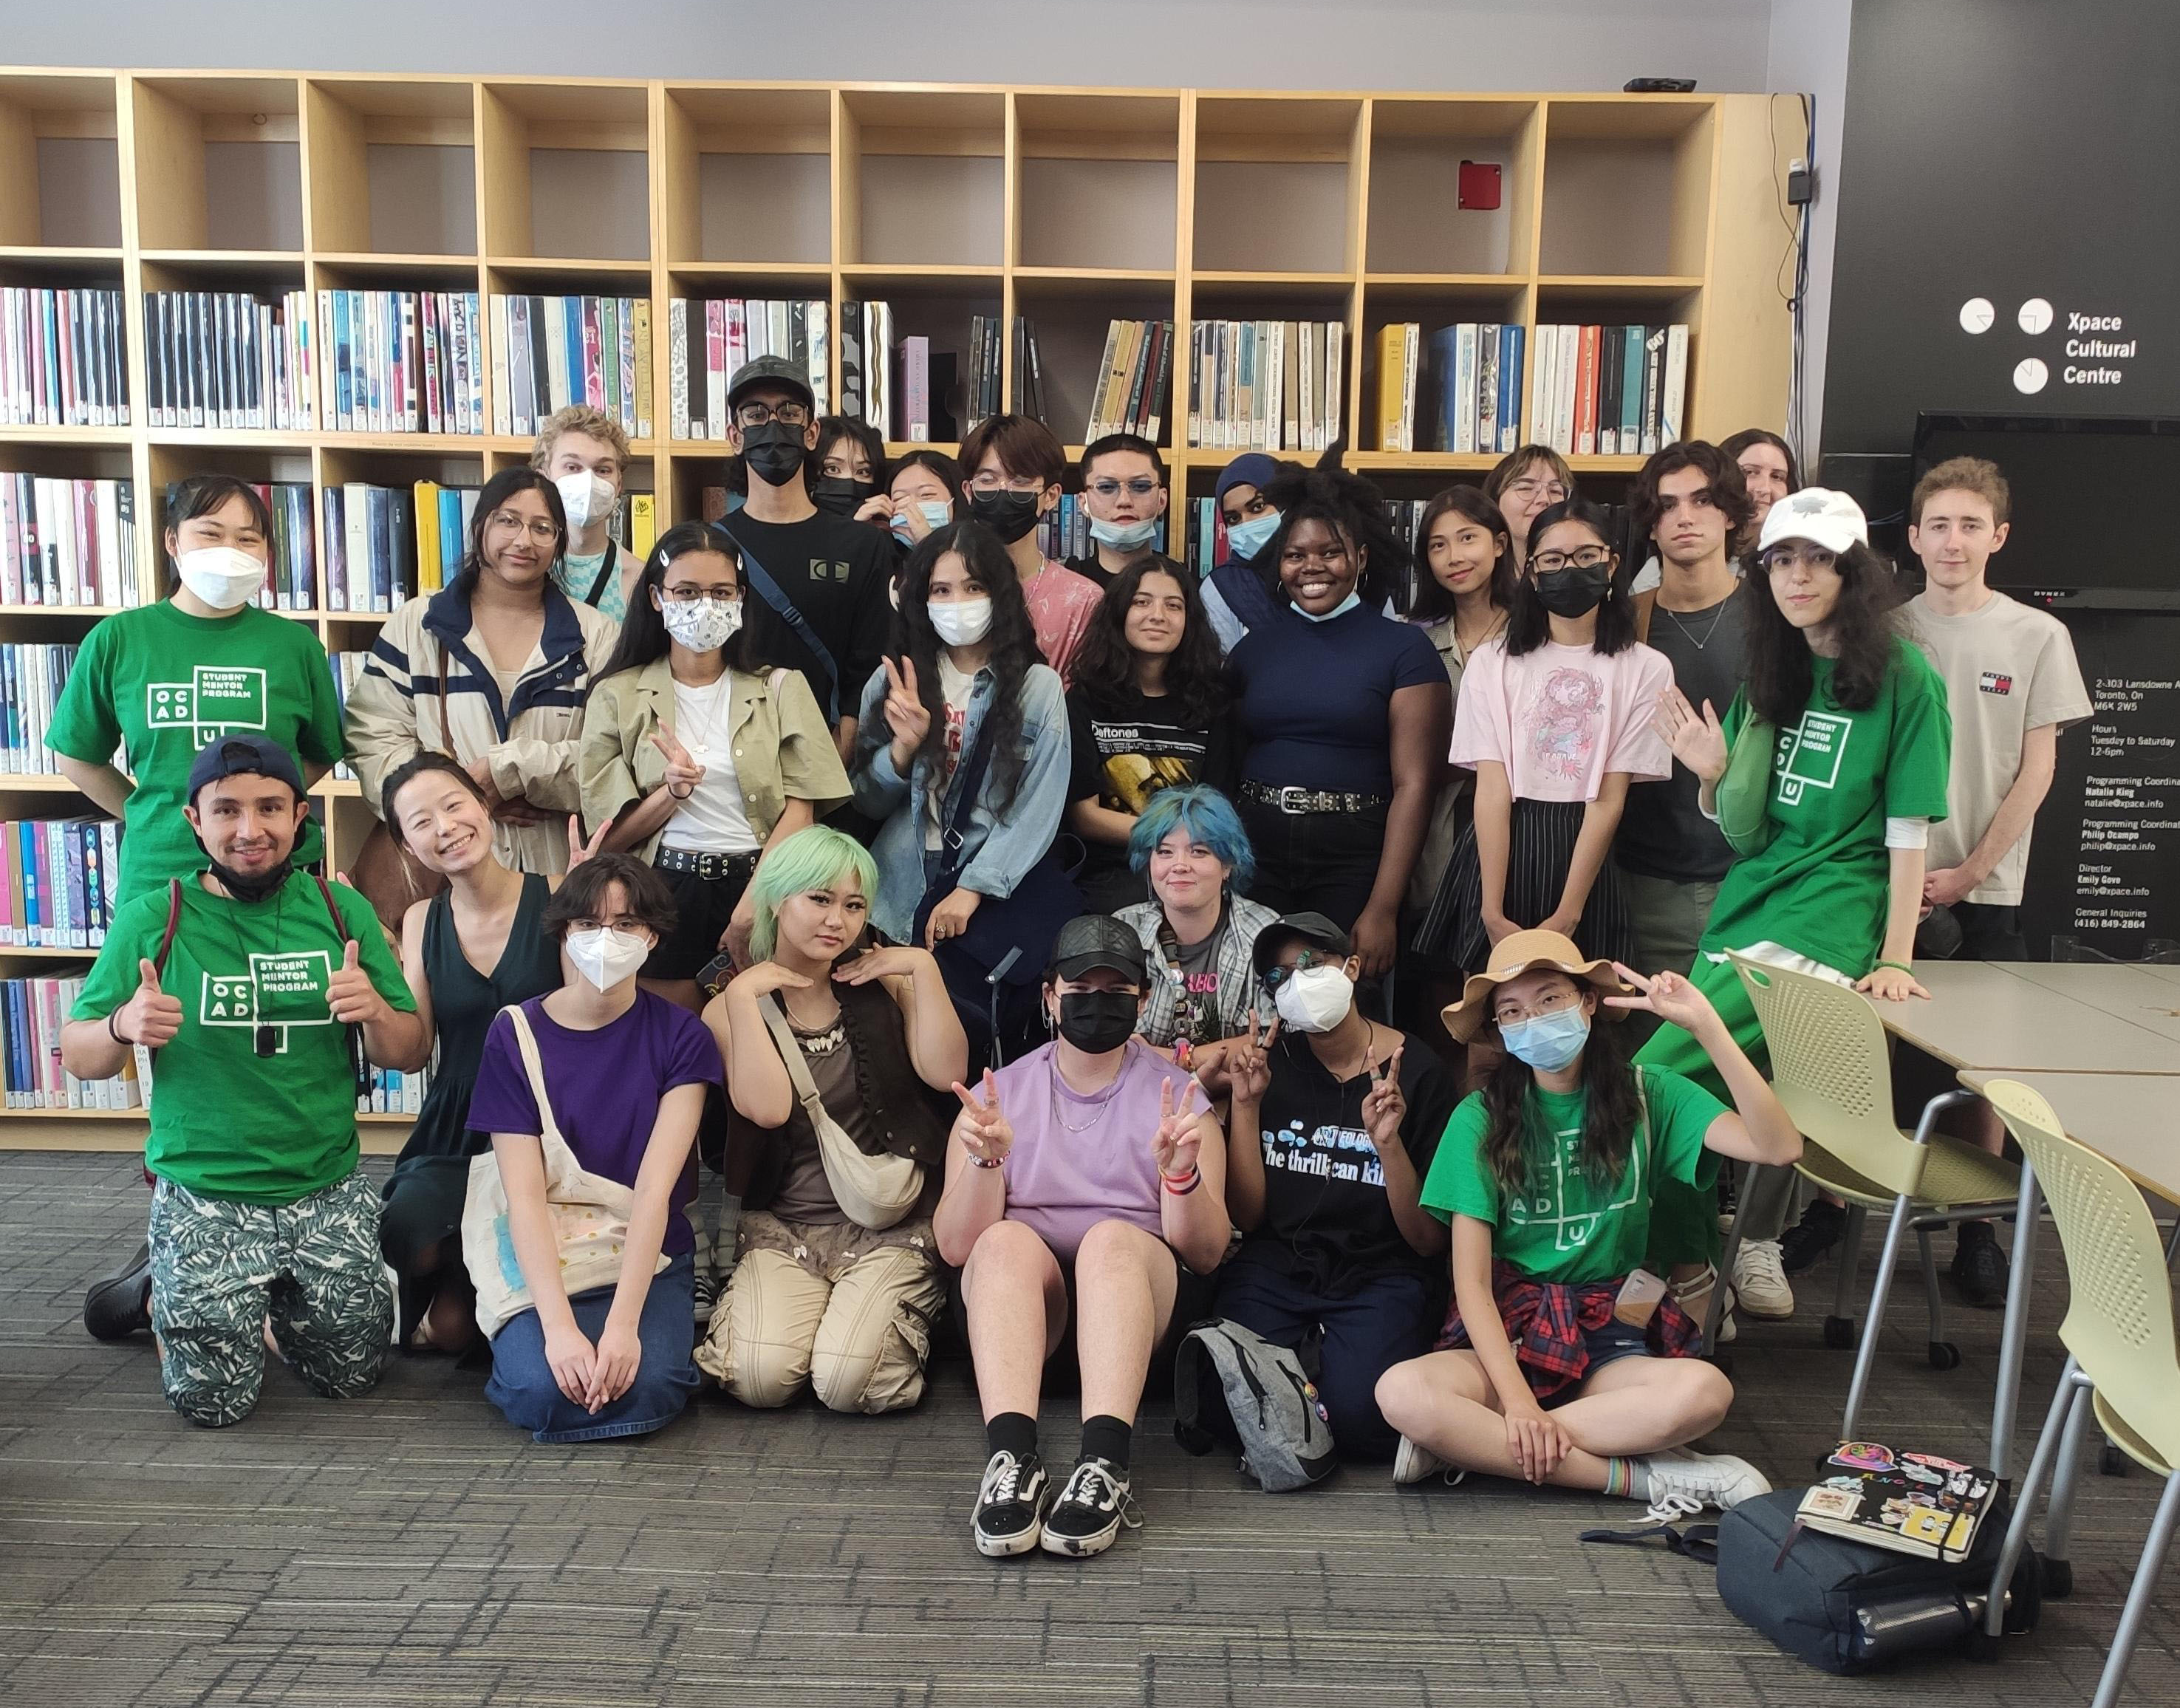 A large group of students pose in front of a book shelf.